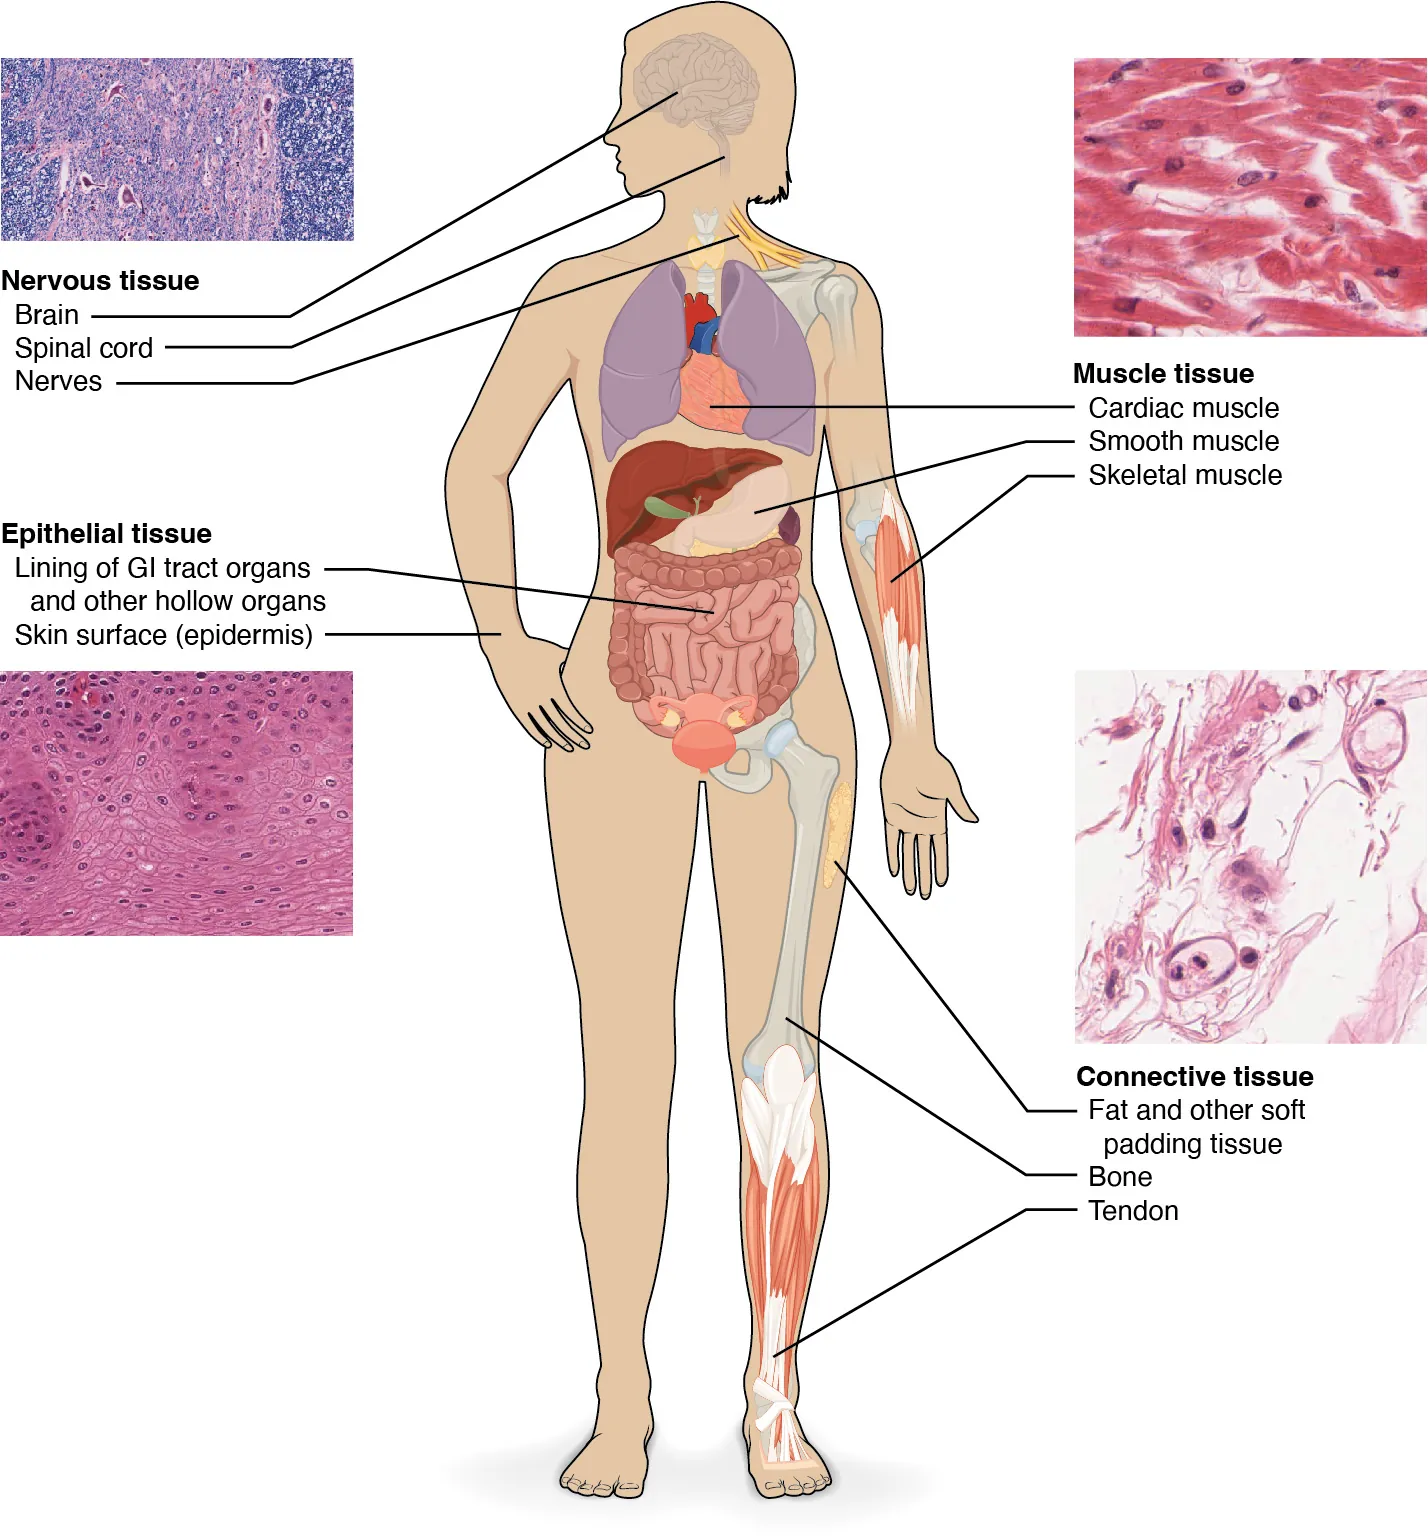 This diagram shows the silhouette of a female surrounded by four micrographs of tissue. Each micrograph has arrows pointing to the organs where that tissue is found. The upper left micrograph shows nervous tissue that is whitish with several large, purple, irregularly-shaped neurons embedded throughout. Nervous tissue is found in the brain, spinal cord and nerves. The upper right micrograph shows muscle tissue that is red with elongated cells and prominent, purple nuclei. Cardiac muscle is found in the heart. Smooth muscle is found in muscular internal organs, such as the stomach. Skeletal muscle is found in parts that are moved voluntarily, such as the arms. The lower left micrograph shows epithelial tissue. This tissue is purple with many round, purple cells with dark purple nuclei. Epithelial tissue is found in the lining of GI tract organs and other hollow organs such as the small intestine. Epithelial tissue also composes the outer layer of the skin, known as the epidermis. Finally, the lower right micrograph shows connective tissue, which is composed of very loosely packed purple cells and fibers. There are large open spaces between clumps of cells and fibers. Connective tissue is found in the leg within fat and other soft padding tissue as well as bones and tendons.